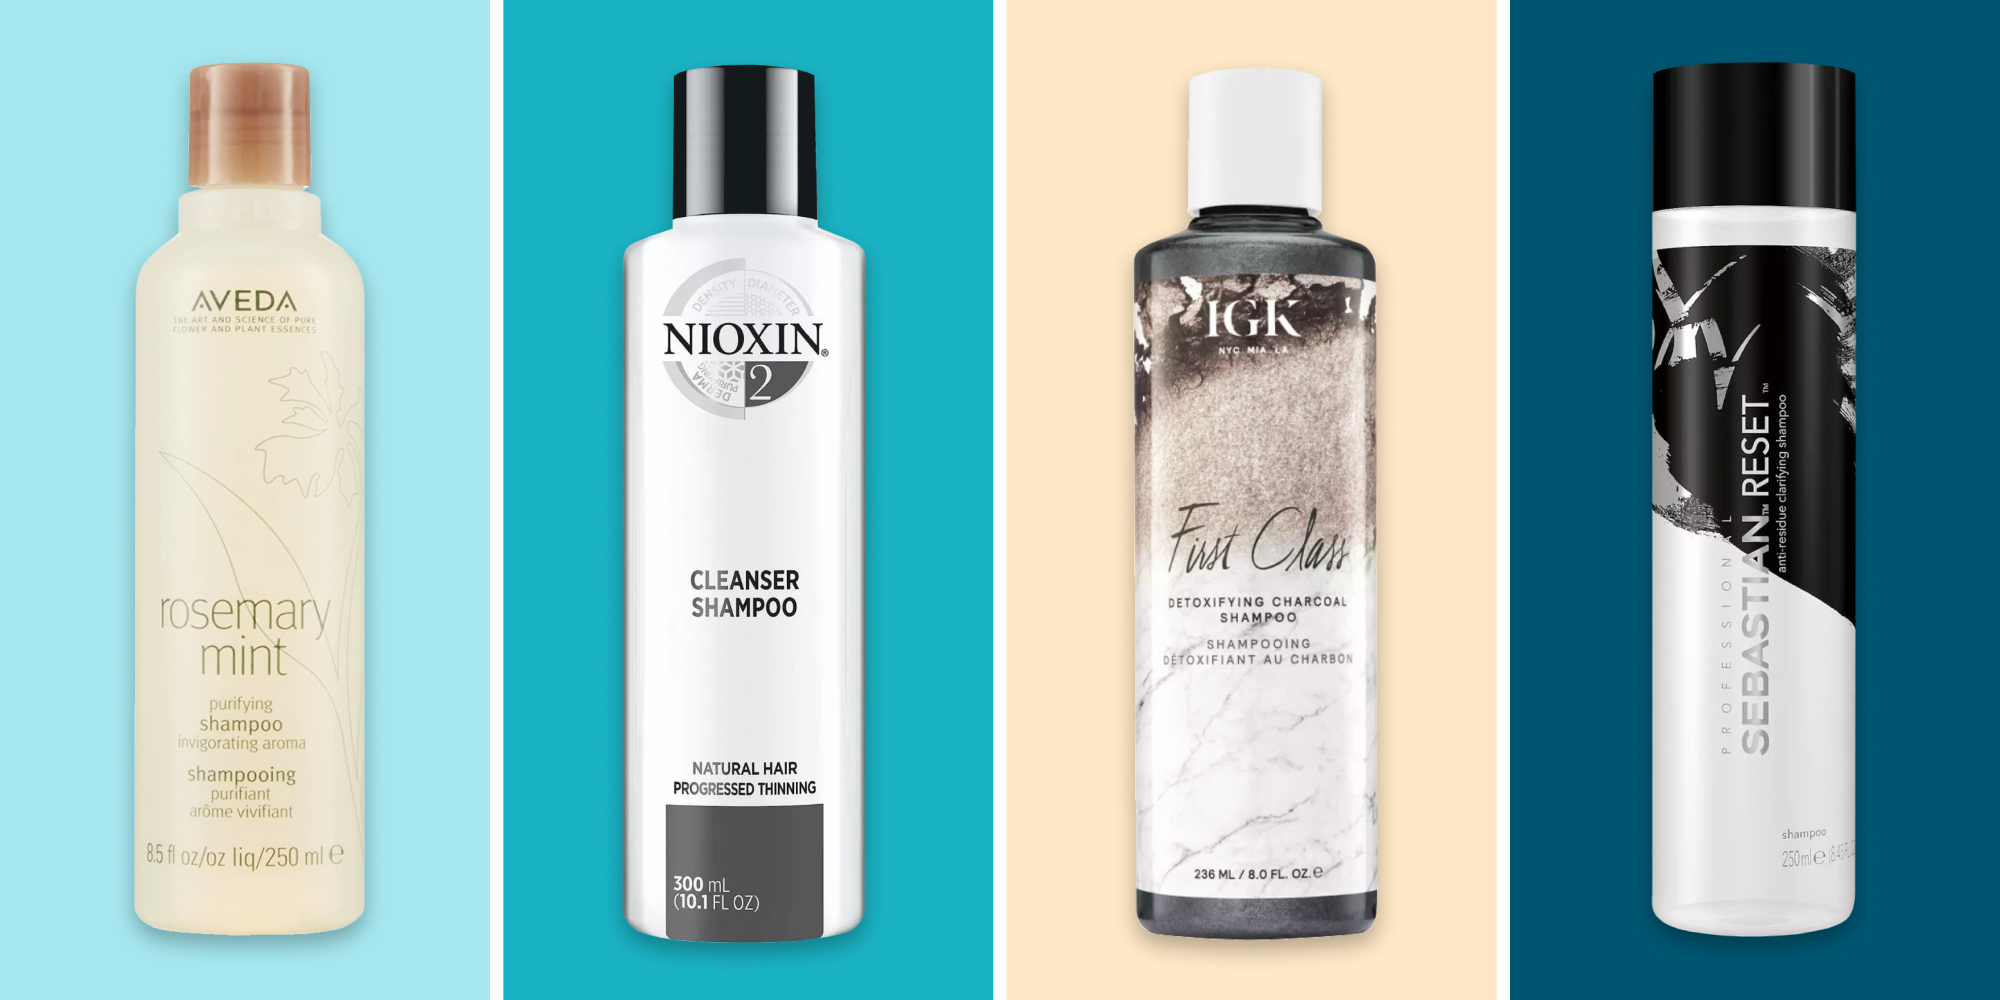 Best Shampoo For Greasy Hair To Help Balance An Oily Scalp | Glamour UK